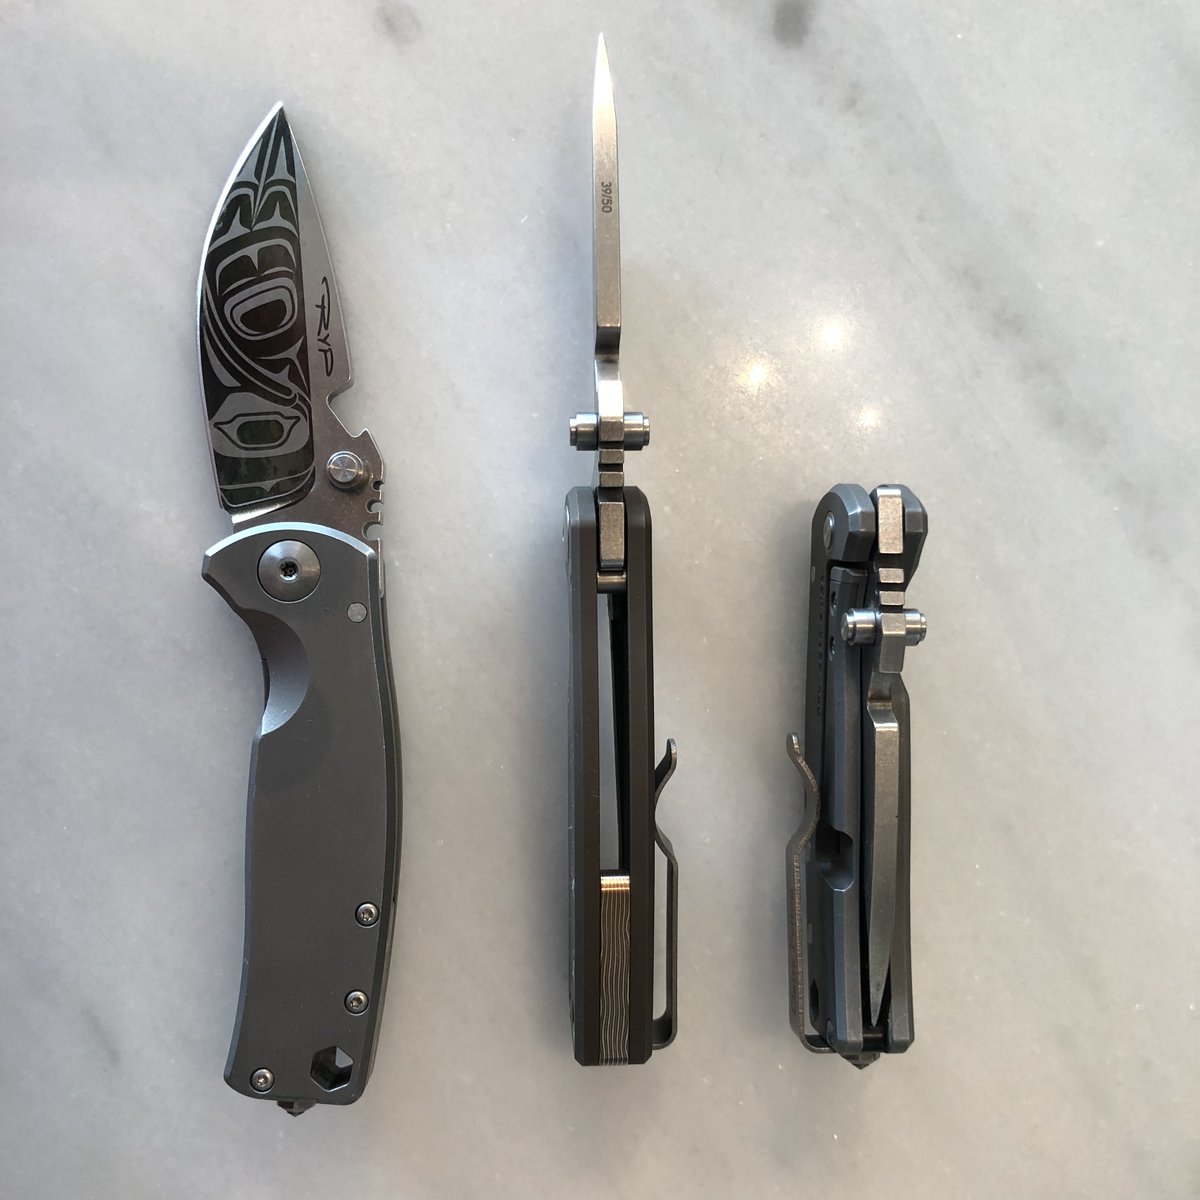 It’s an #americanmadeedc collection hang out kinda Friday night. 
/
\
/
\
#straack #geardialedin #dpxgear #hestfurban #titanium #fridaynightswithmycollection